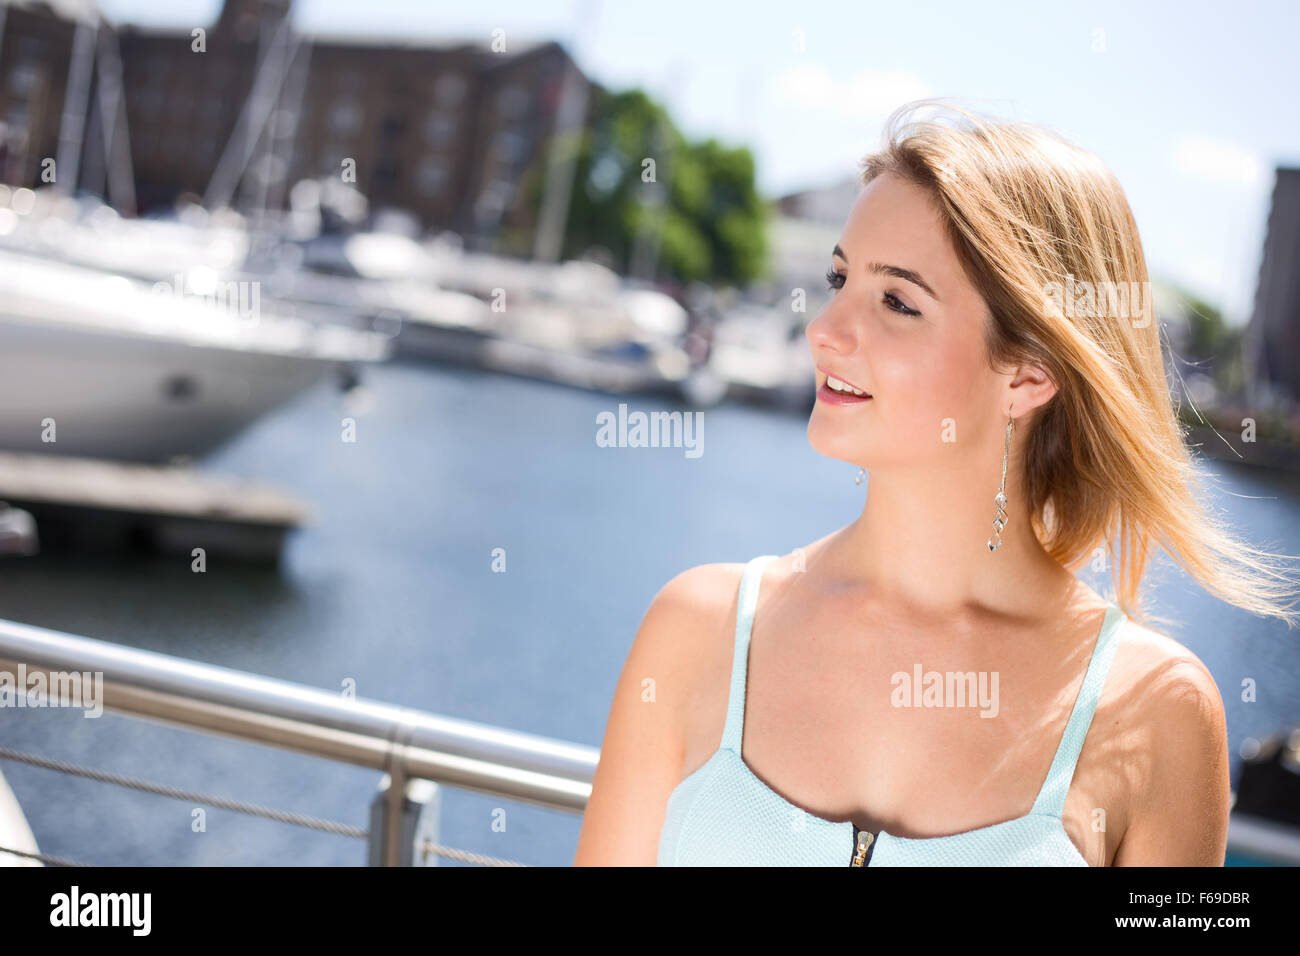 portrait of a young woman by the marina Stock Photo